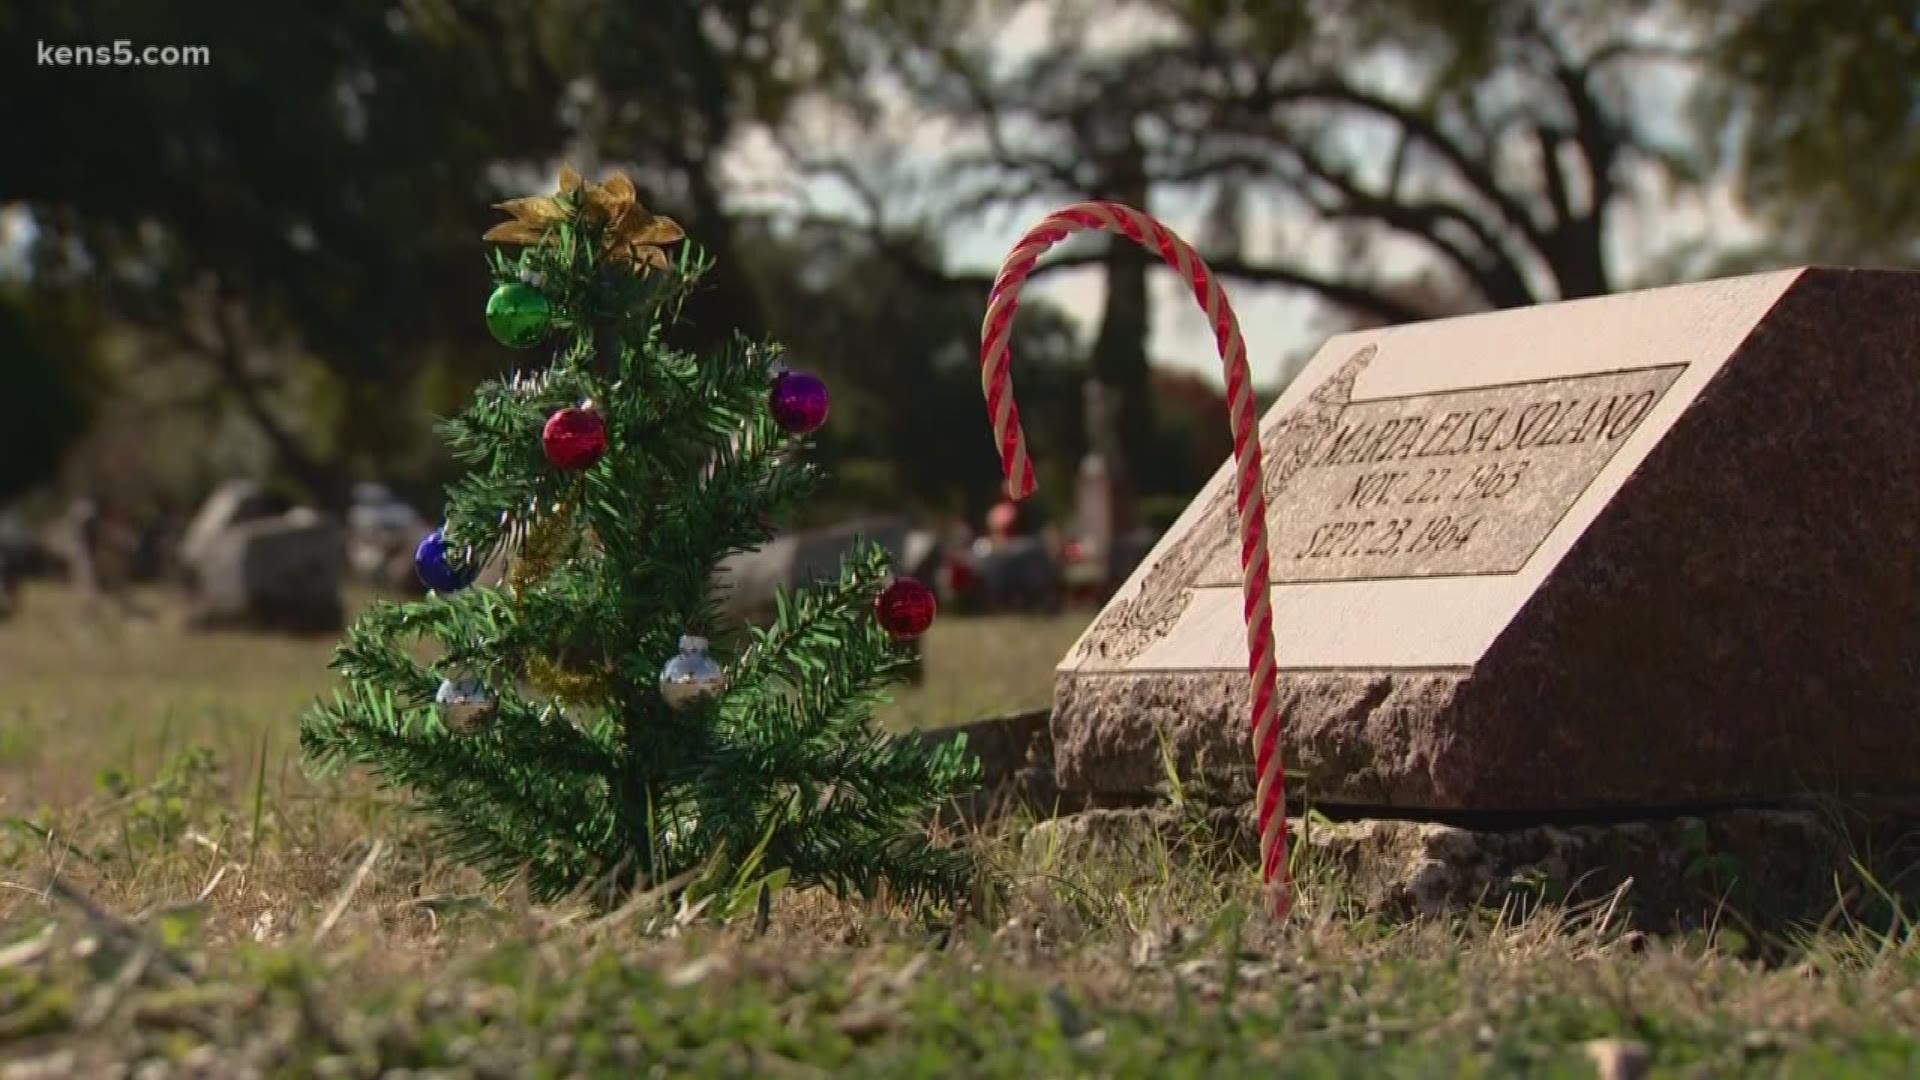 The holiday season is all about spending time with the people you love most. For some, that means a trip with flowers to the cemetery.